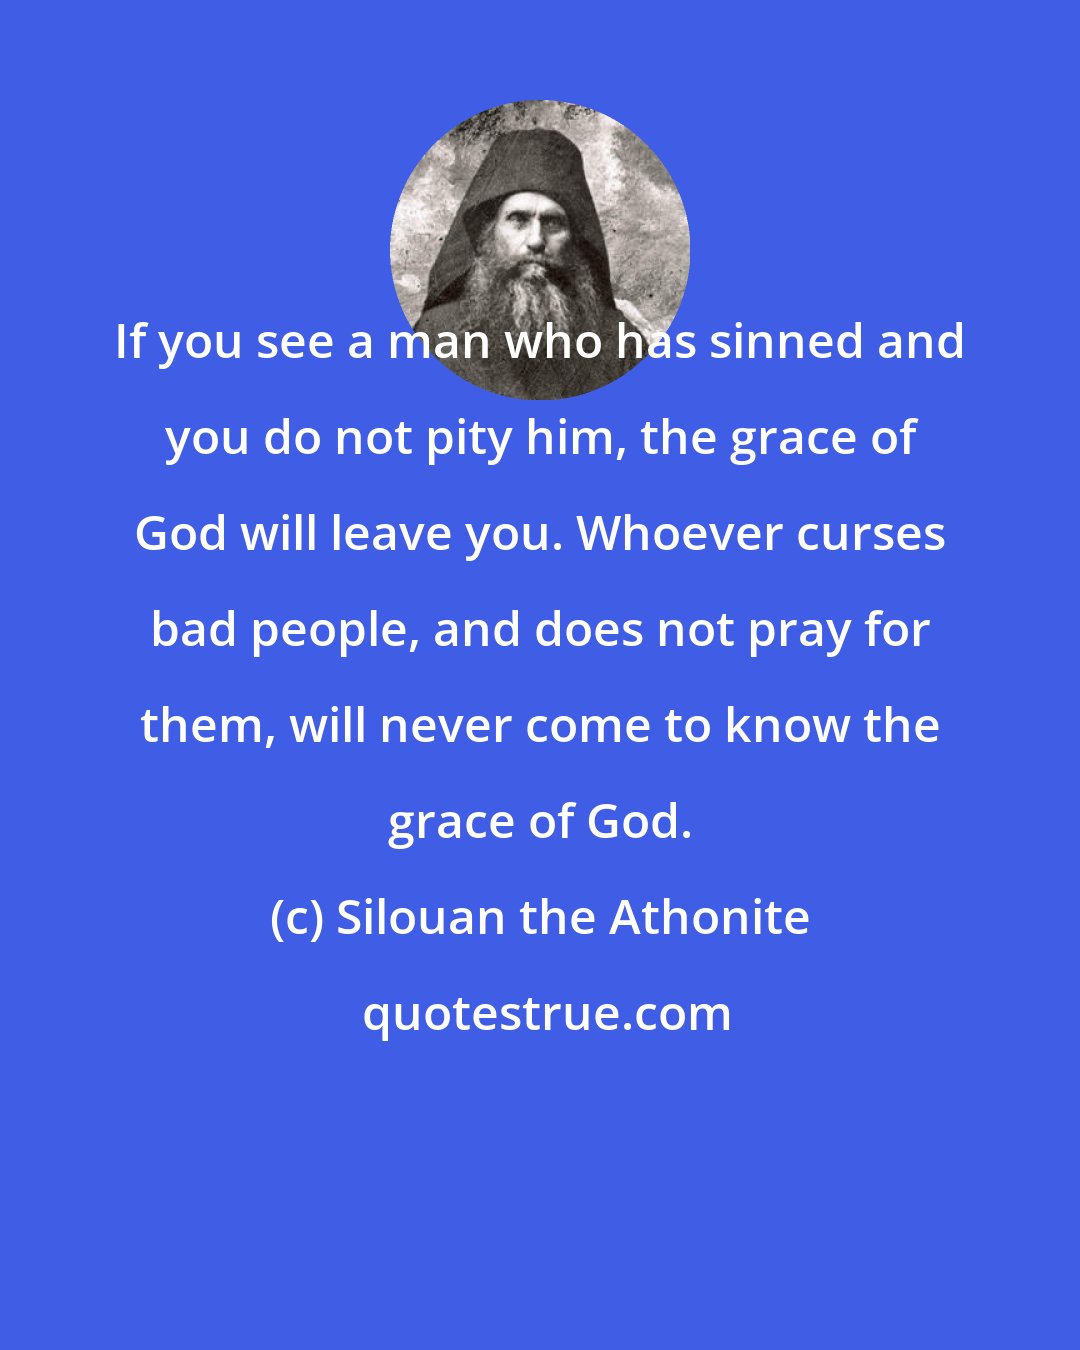 Silouan the Athonite: If you see a man who has sinned and you do not pity him, the grace of God will leave you. Whoever curses bad people, and does not pray for them, will never come to know the grace of God.